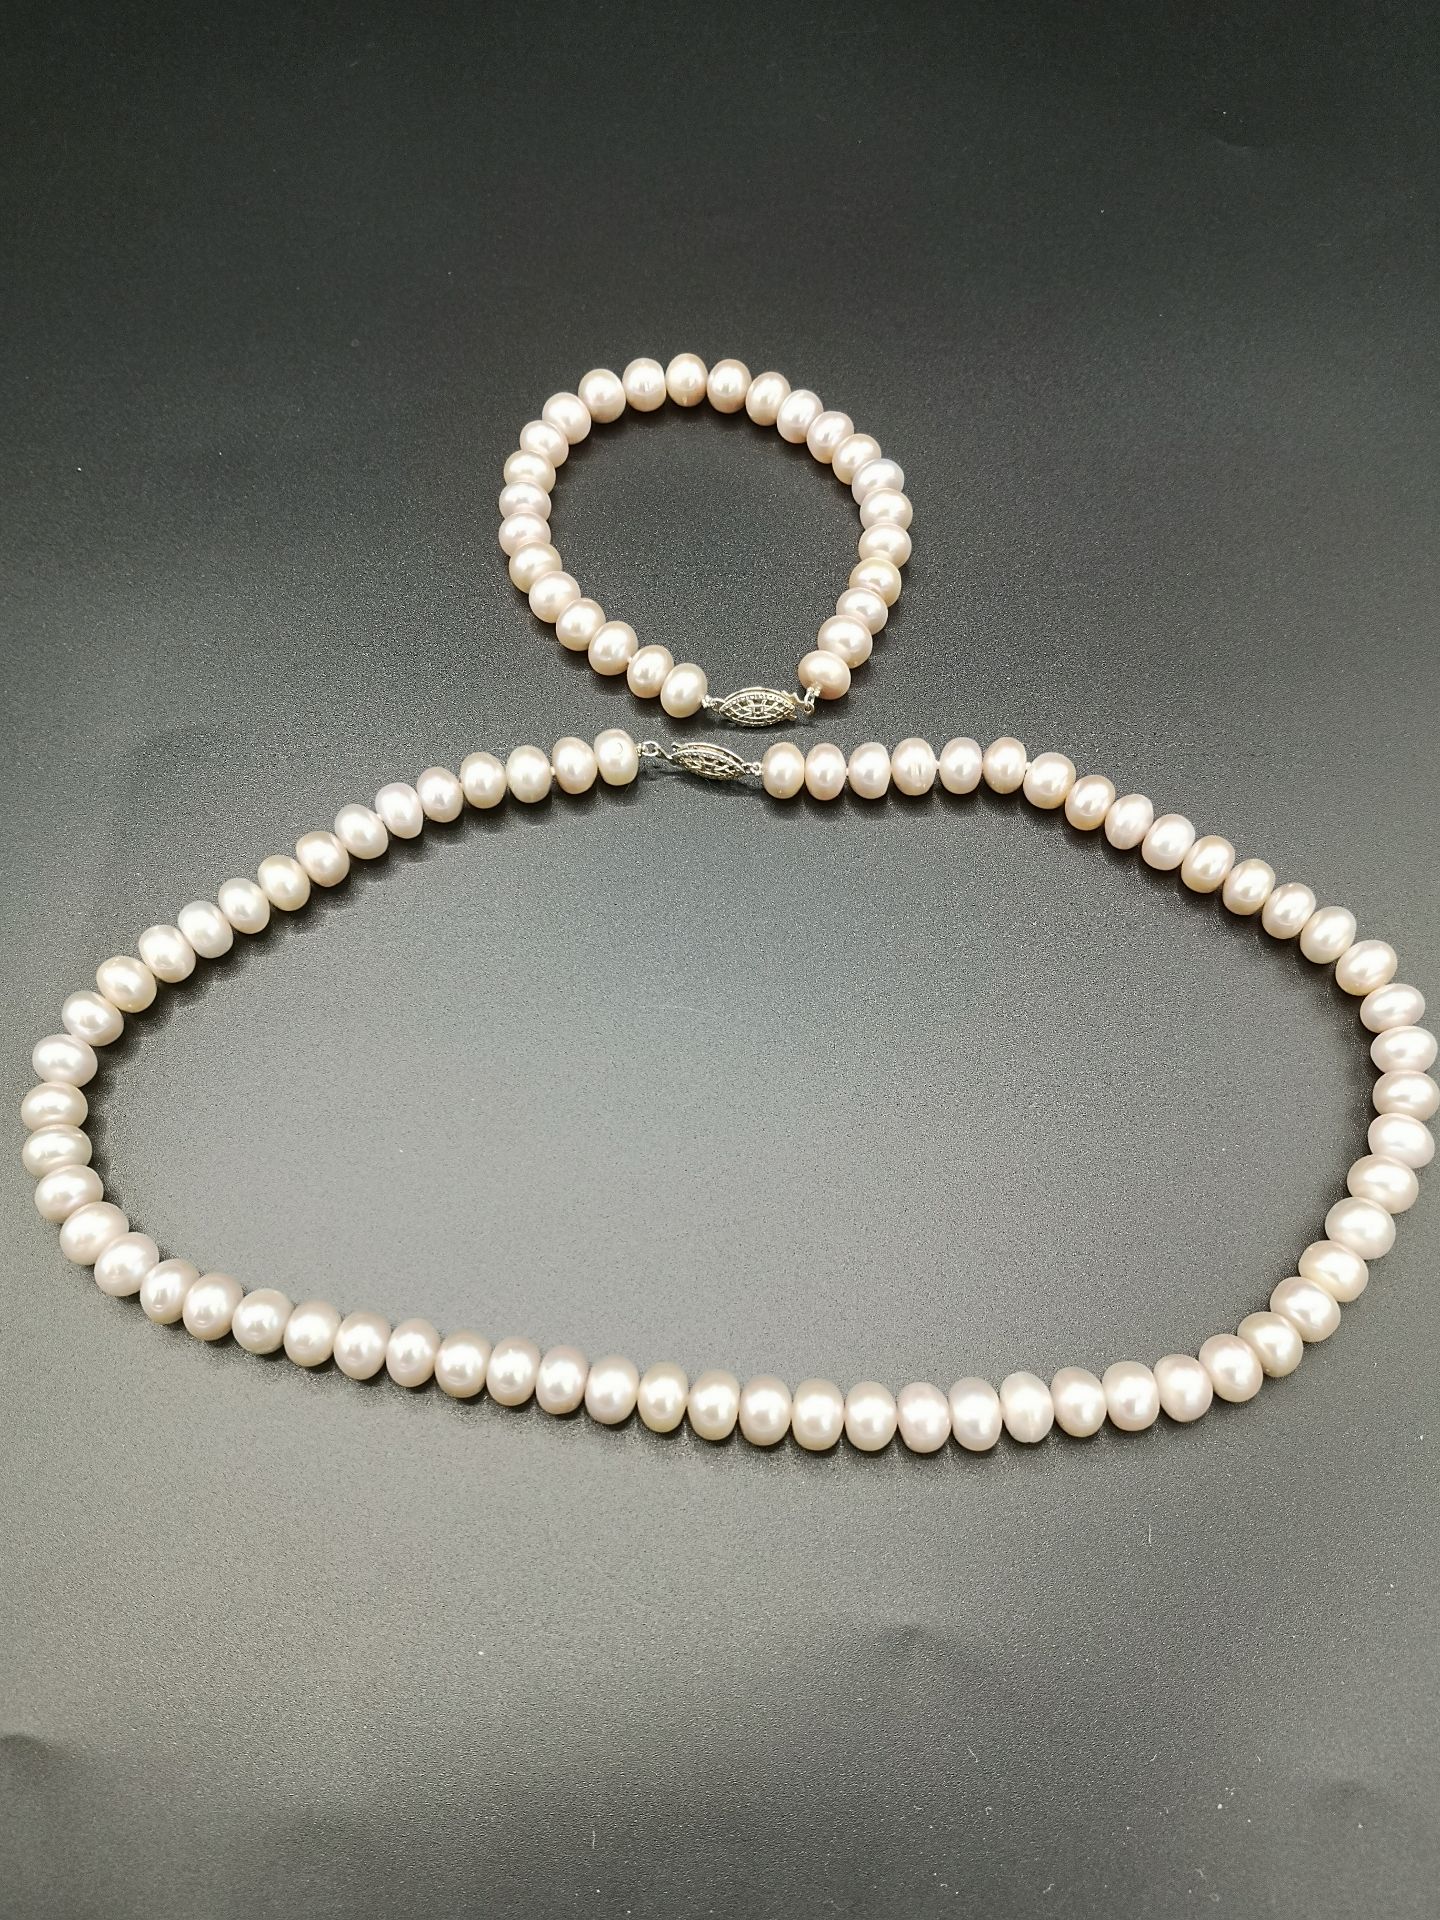 Pearl necklace with matching bracelet - Image 5 of 5